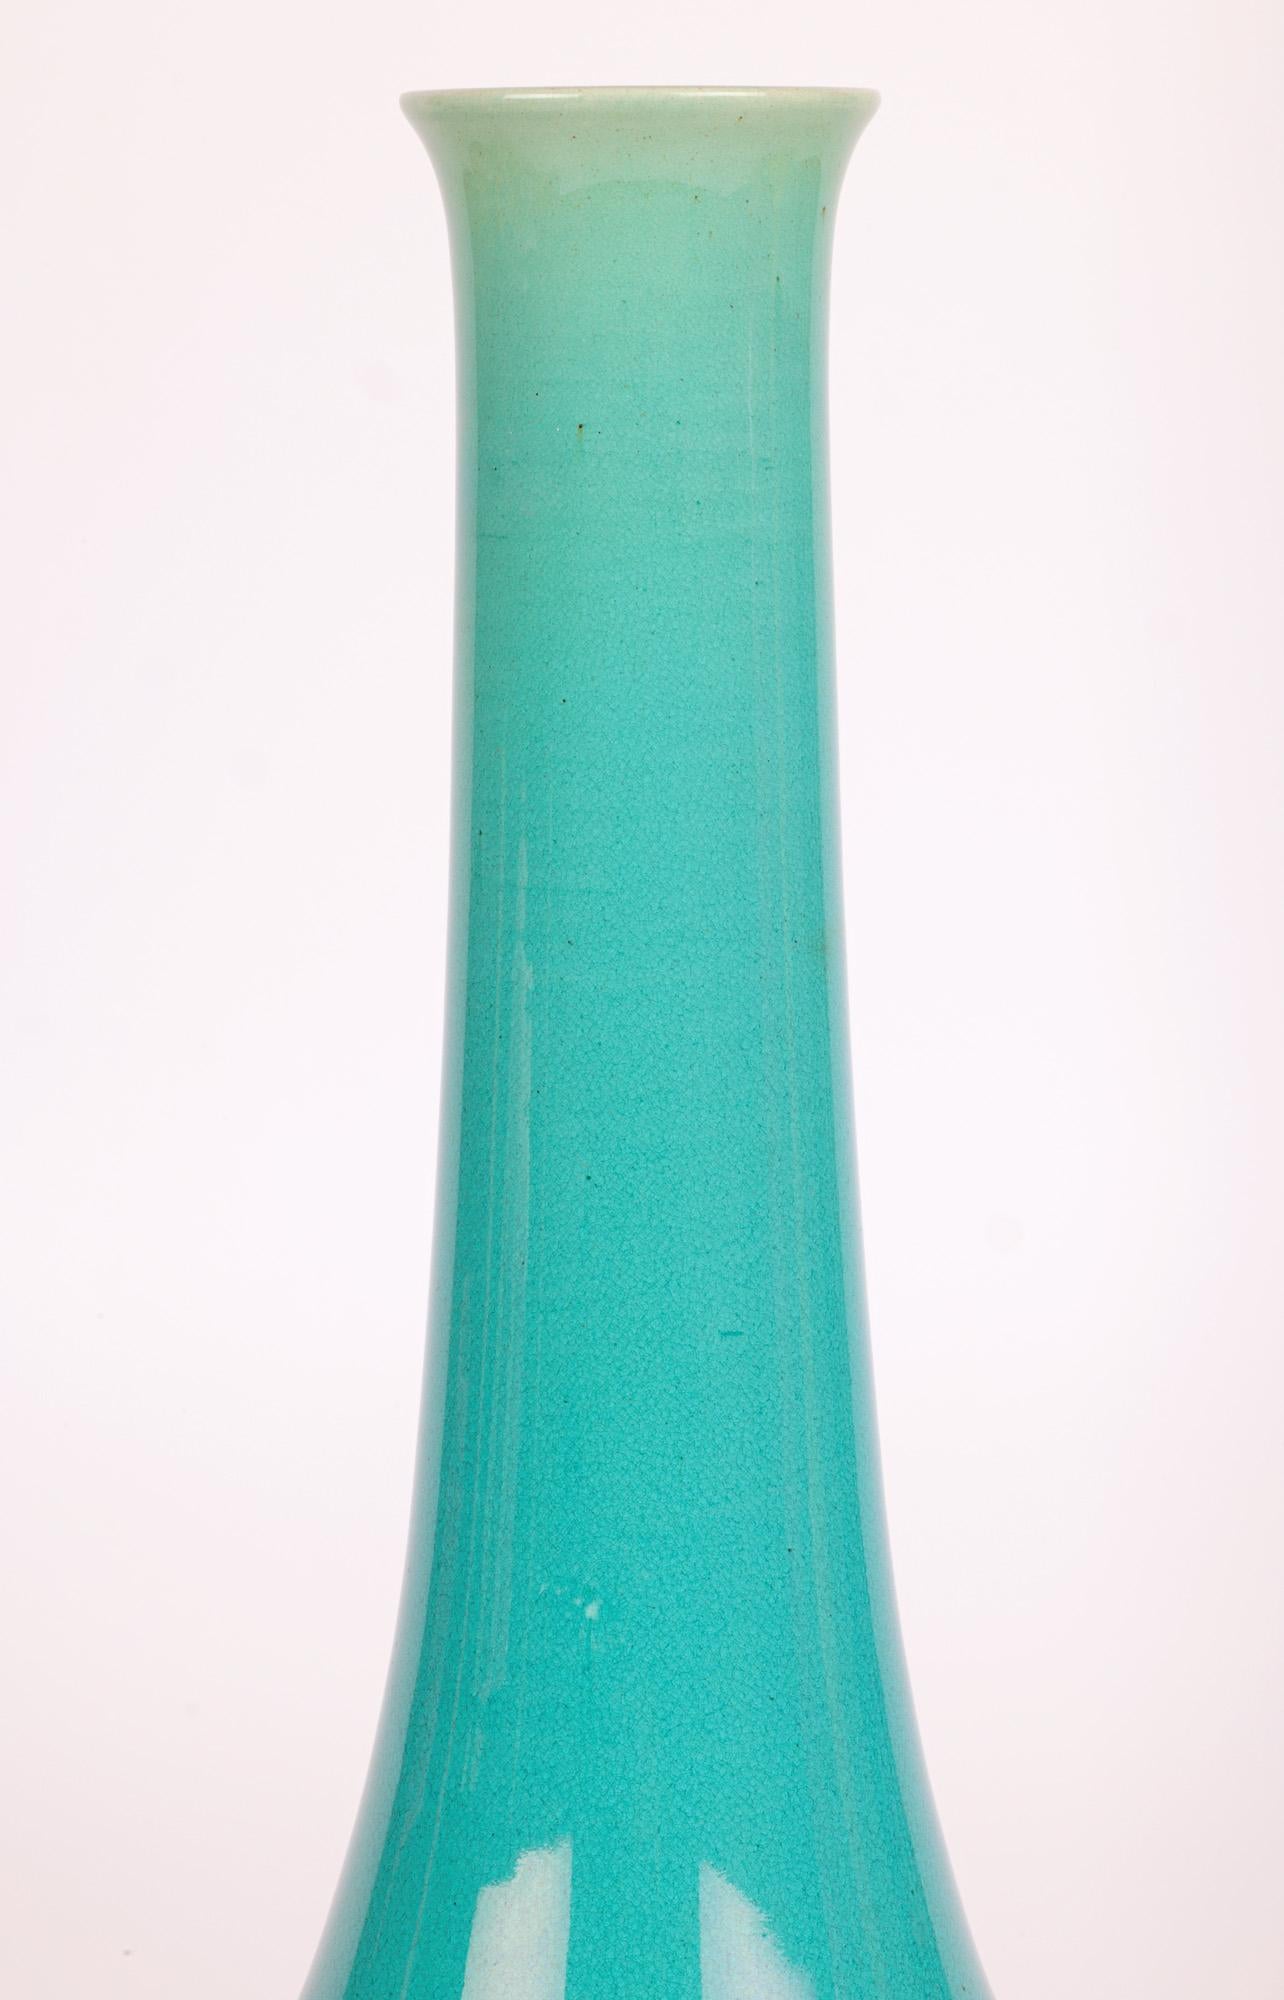 A stylish and large Burmantofts Arts & Crafts turquoise glazed art pottery bud shaped bottle vase made in Leeds and dating from around 1890. 
The vase is part of a private collection of Arts and Crafts influenced pottery amassed in the mid 1980’s.